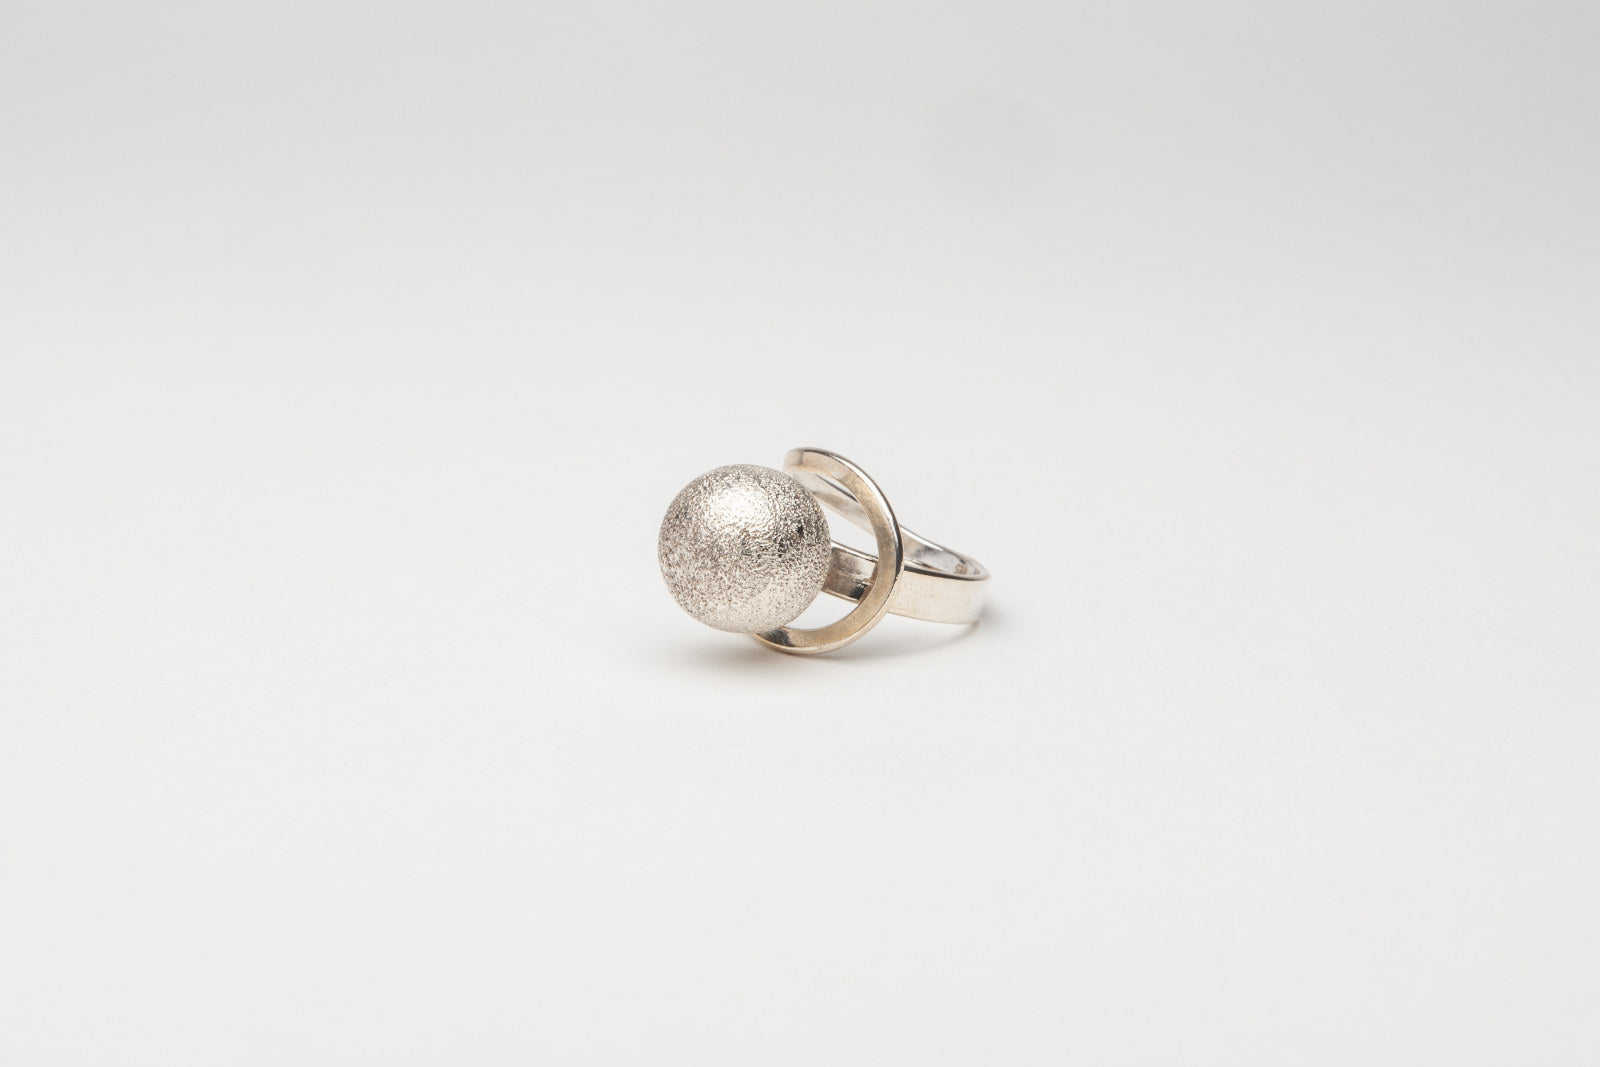 Adjustable Limited Edition Silver Ring